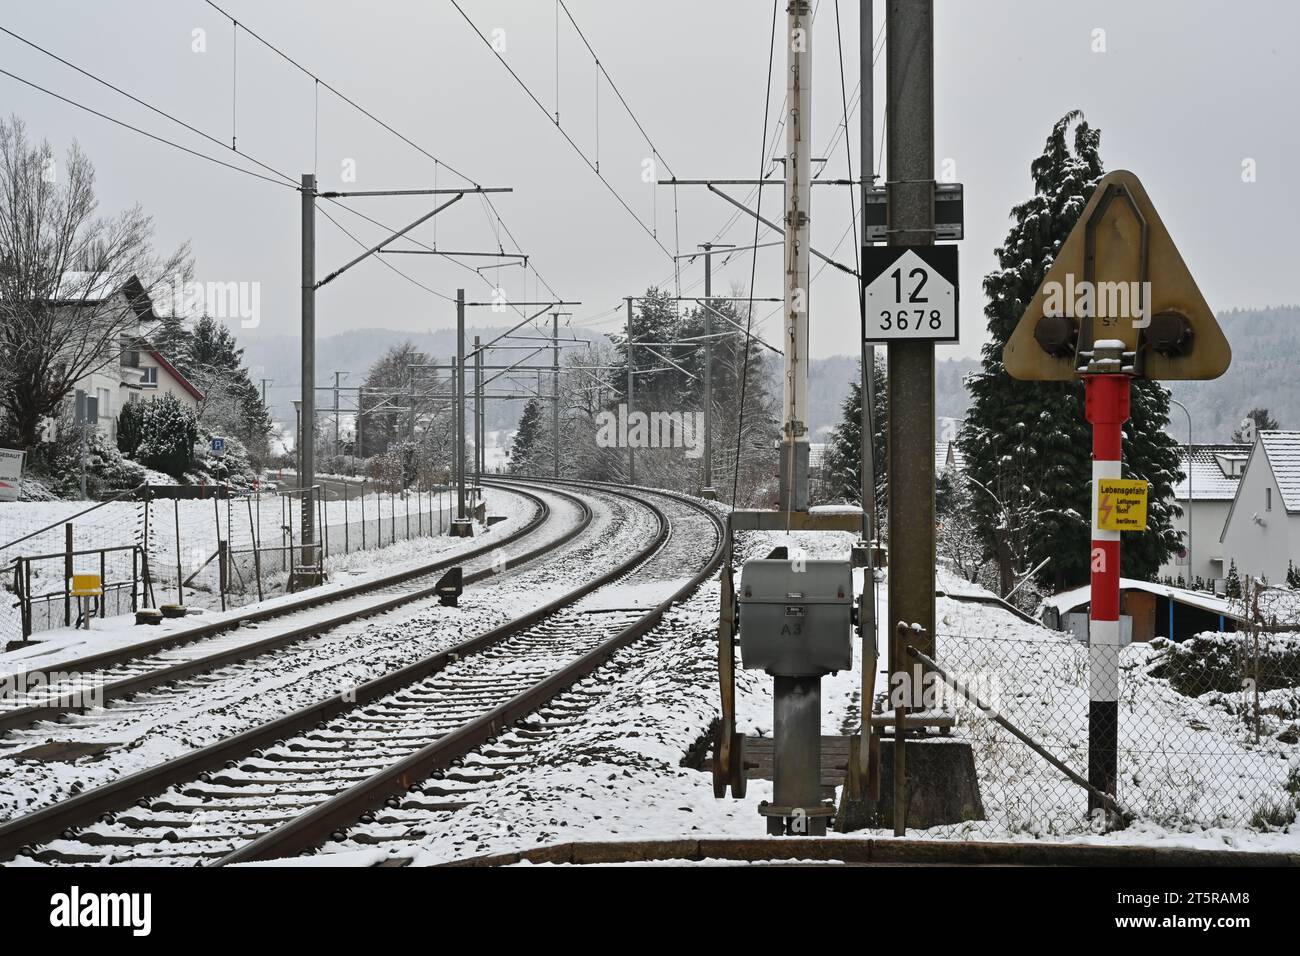 Railway tracks in winter. On the foreground there is technology for level crossing with ramp. Stock Photo